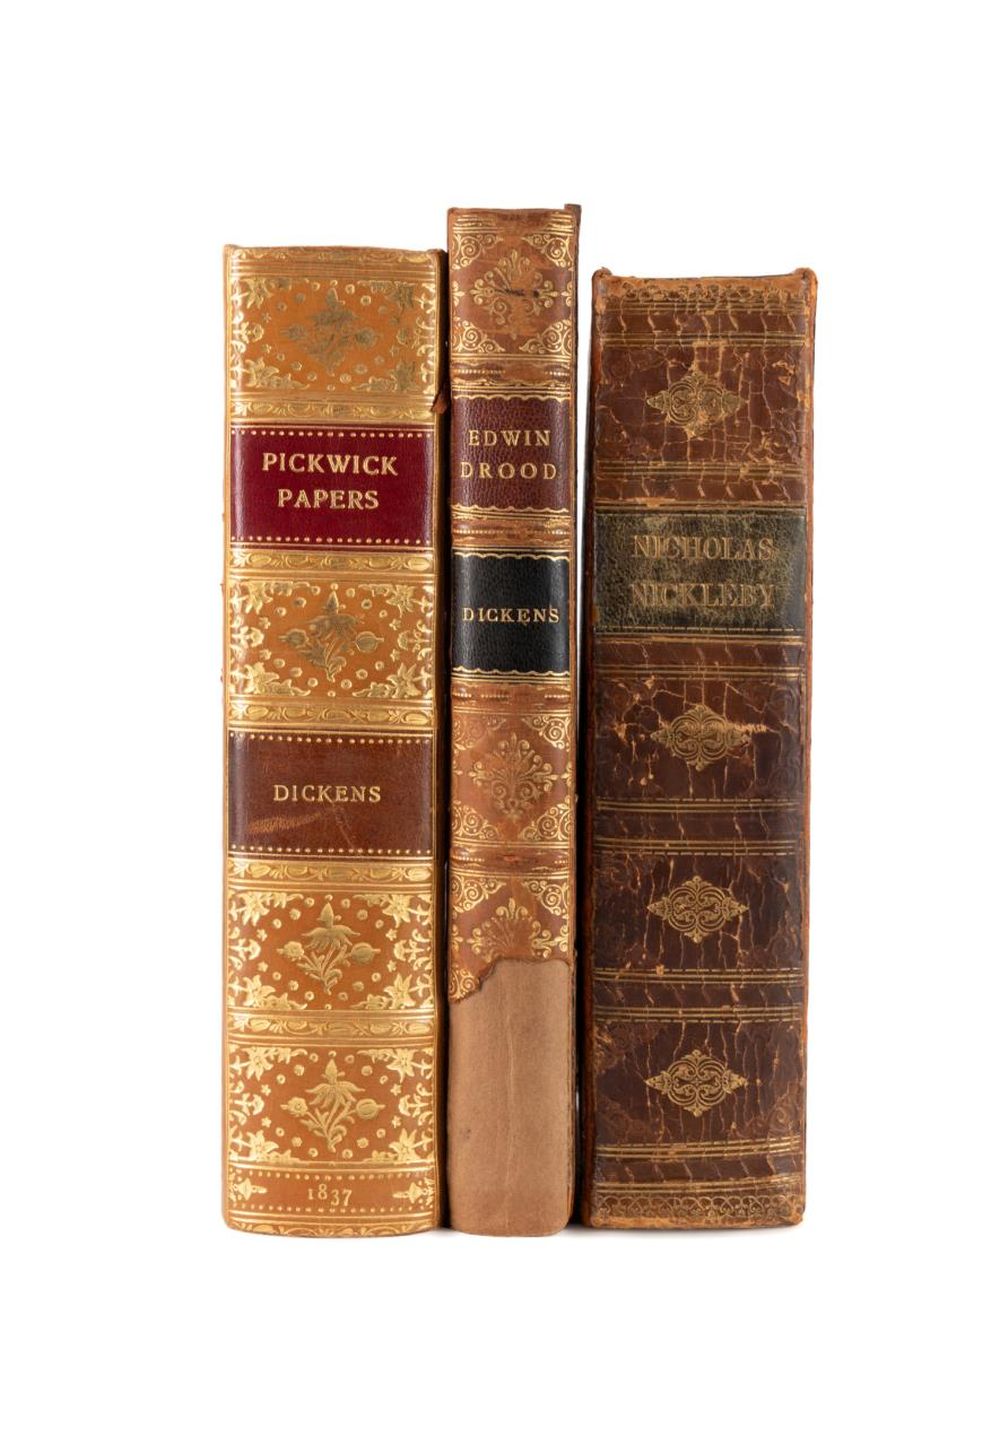 3VOL CHARLES DICKENS FINELY BOUND 3cd4dd